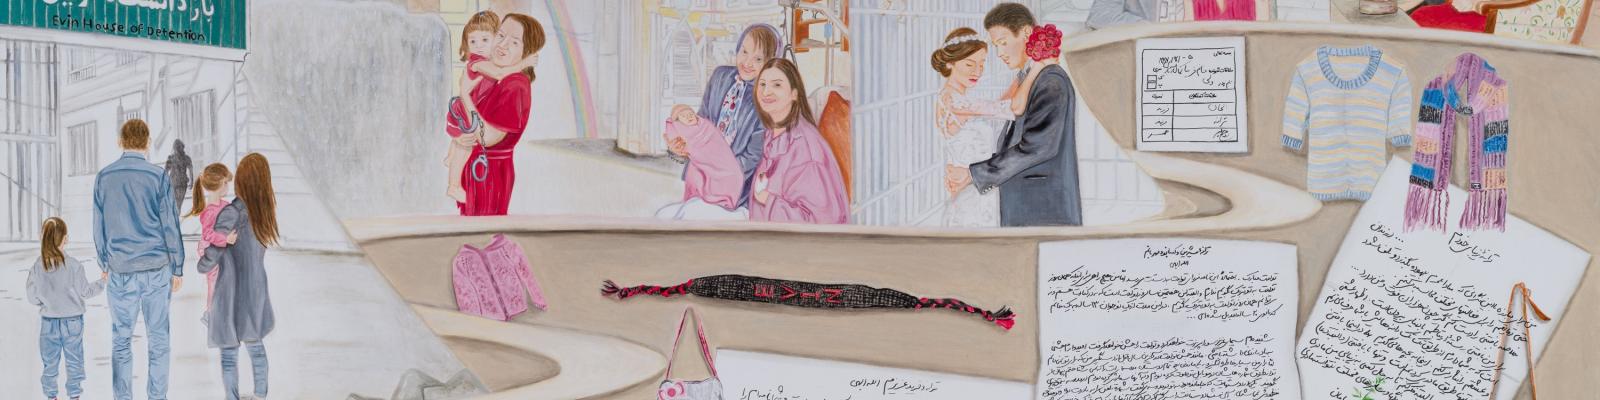 Painting with imagery of domestic life, motherhood and incarceration by Maryam Safajoo